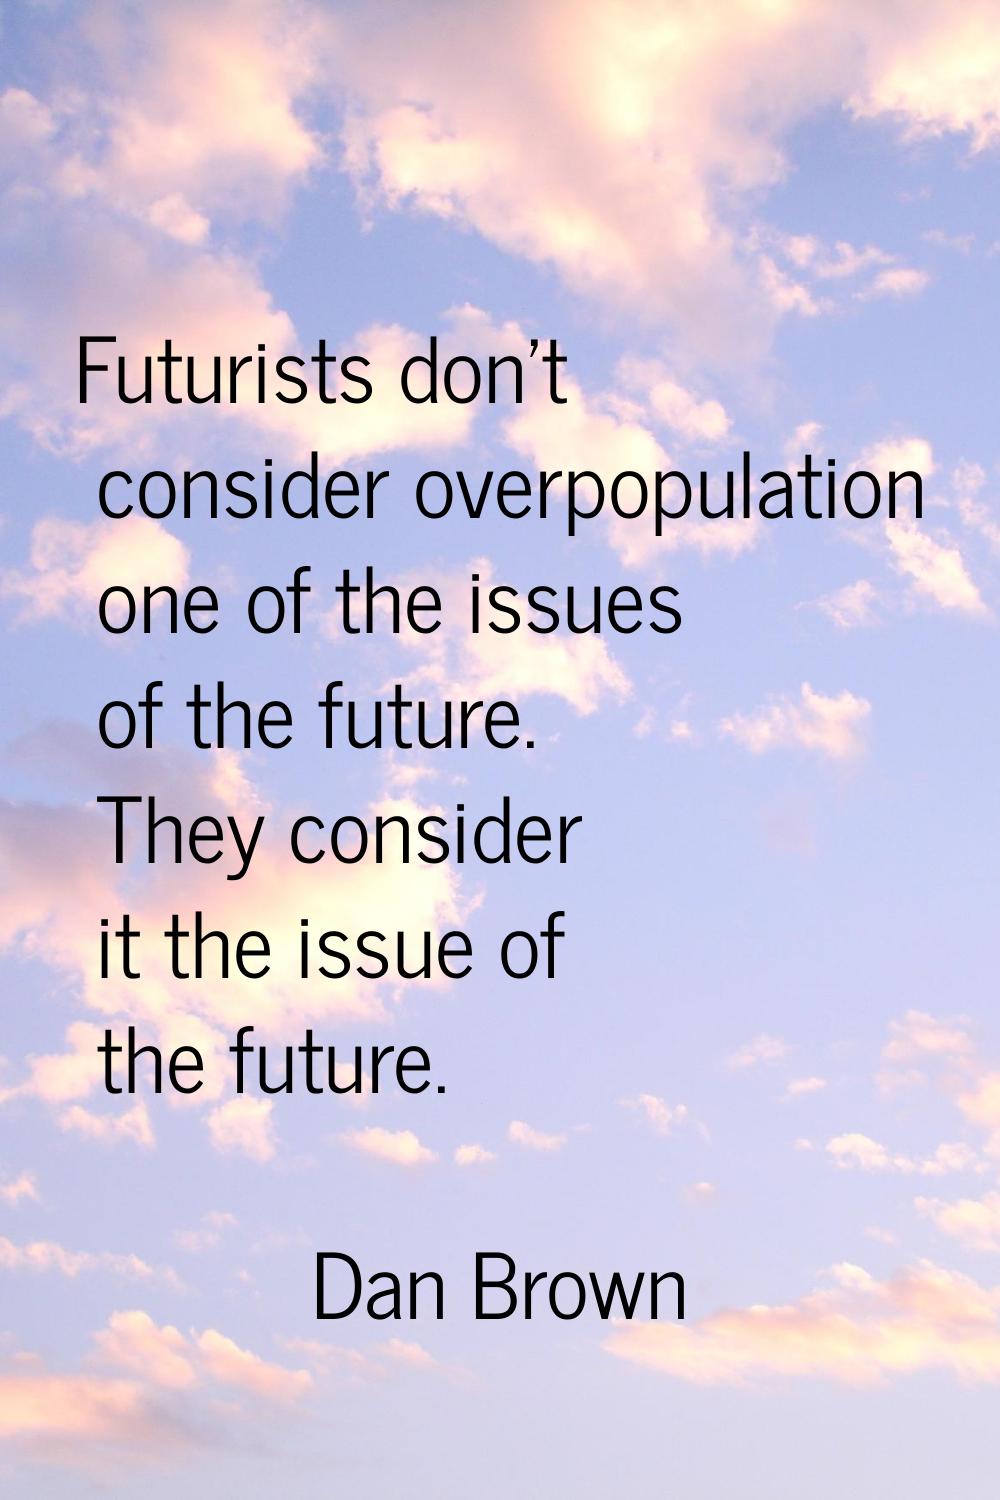 Futurists don't consider overpopulation one of the issues of the future. They consider it the issue